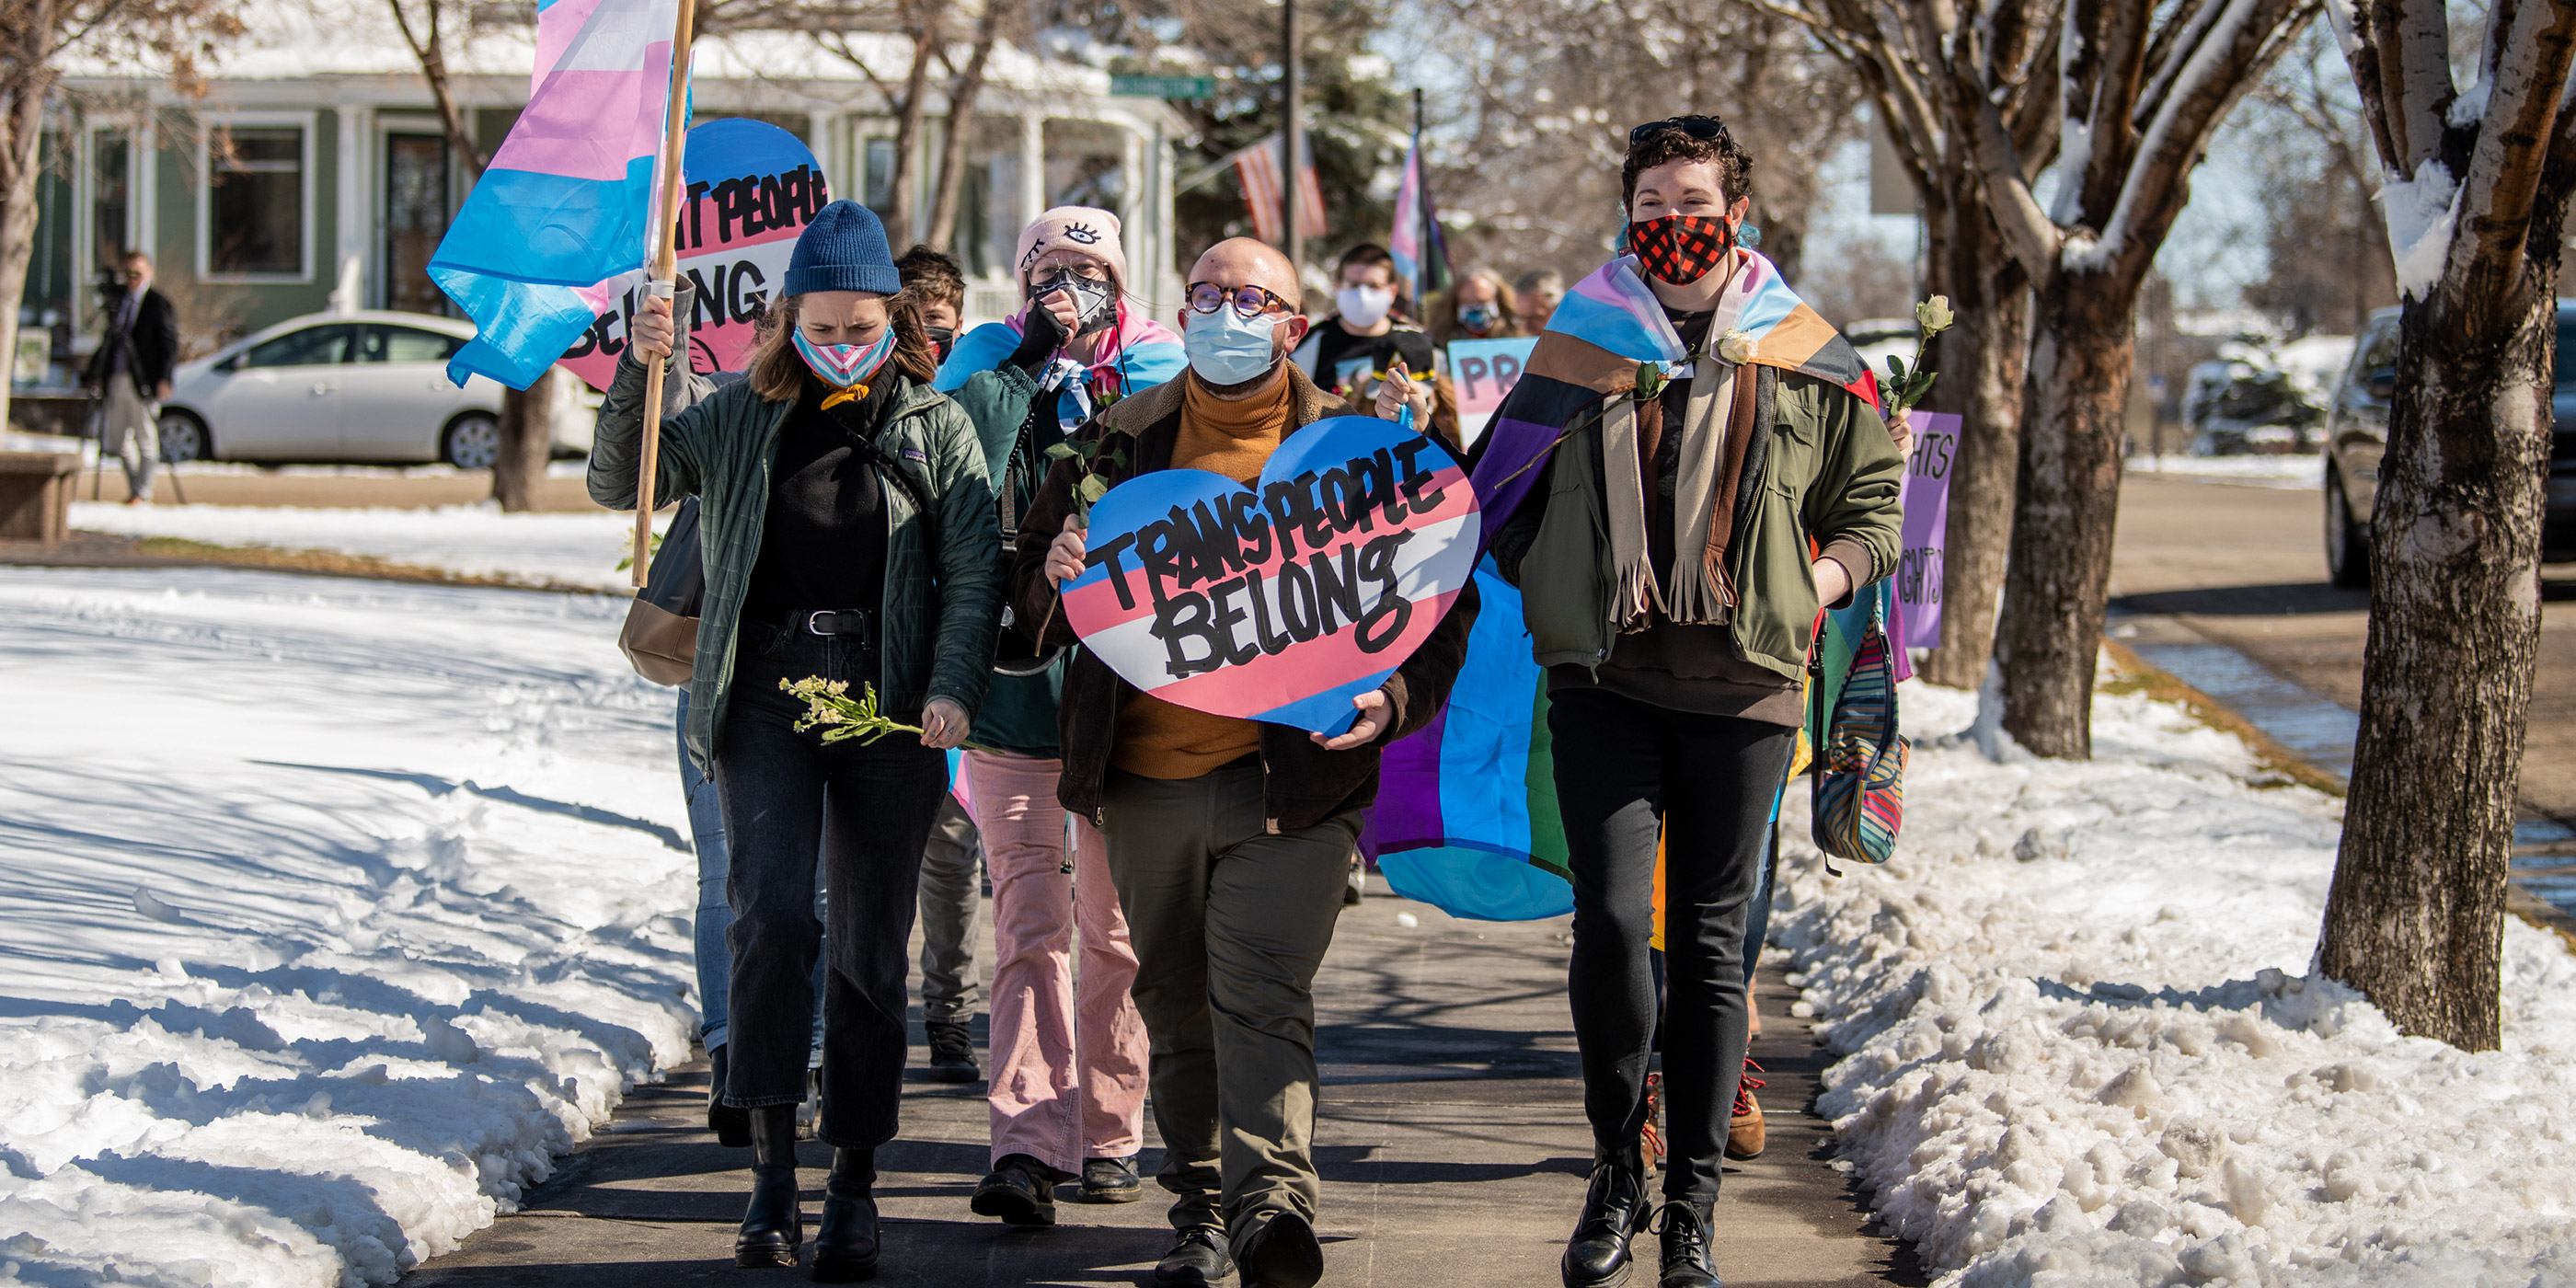 Individuals at a rally march, with a sign that reads “Trans People Belong.”